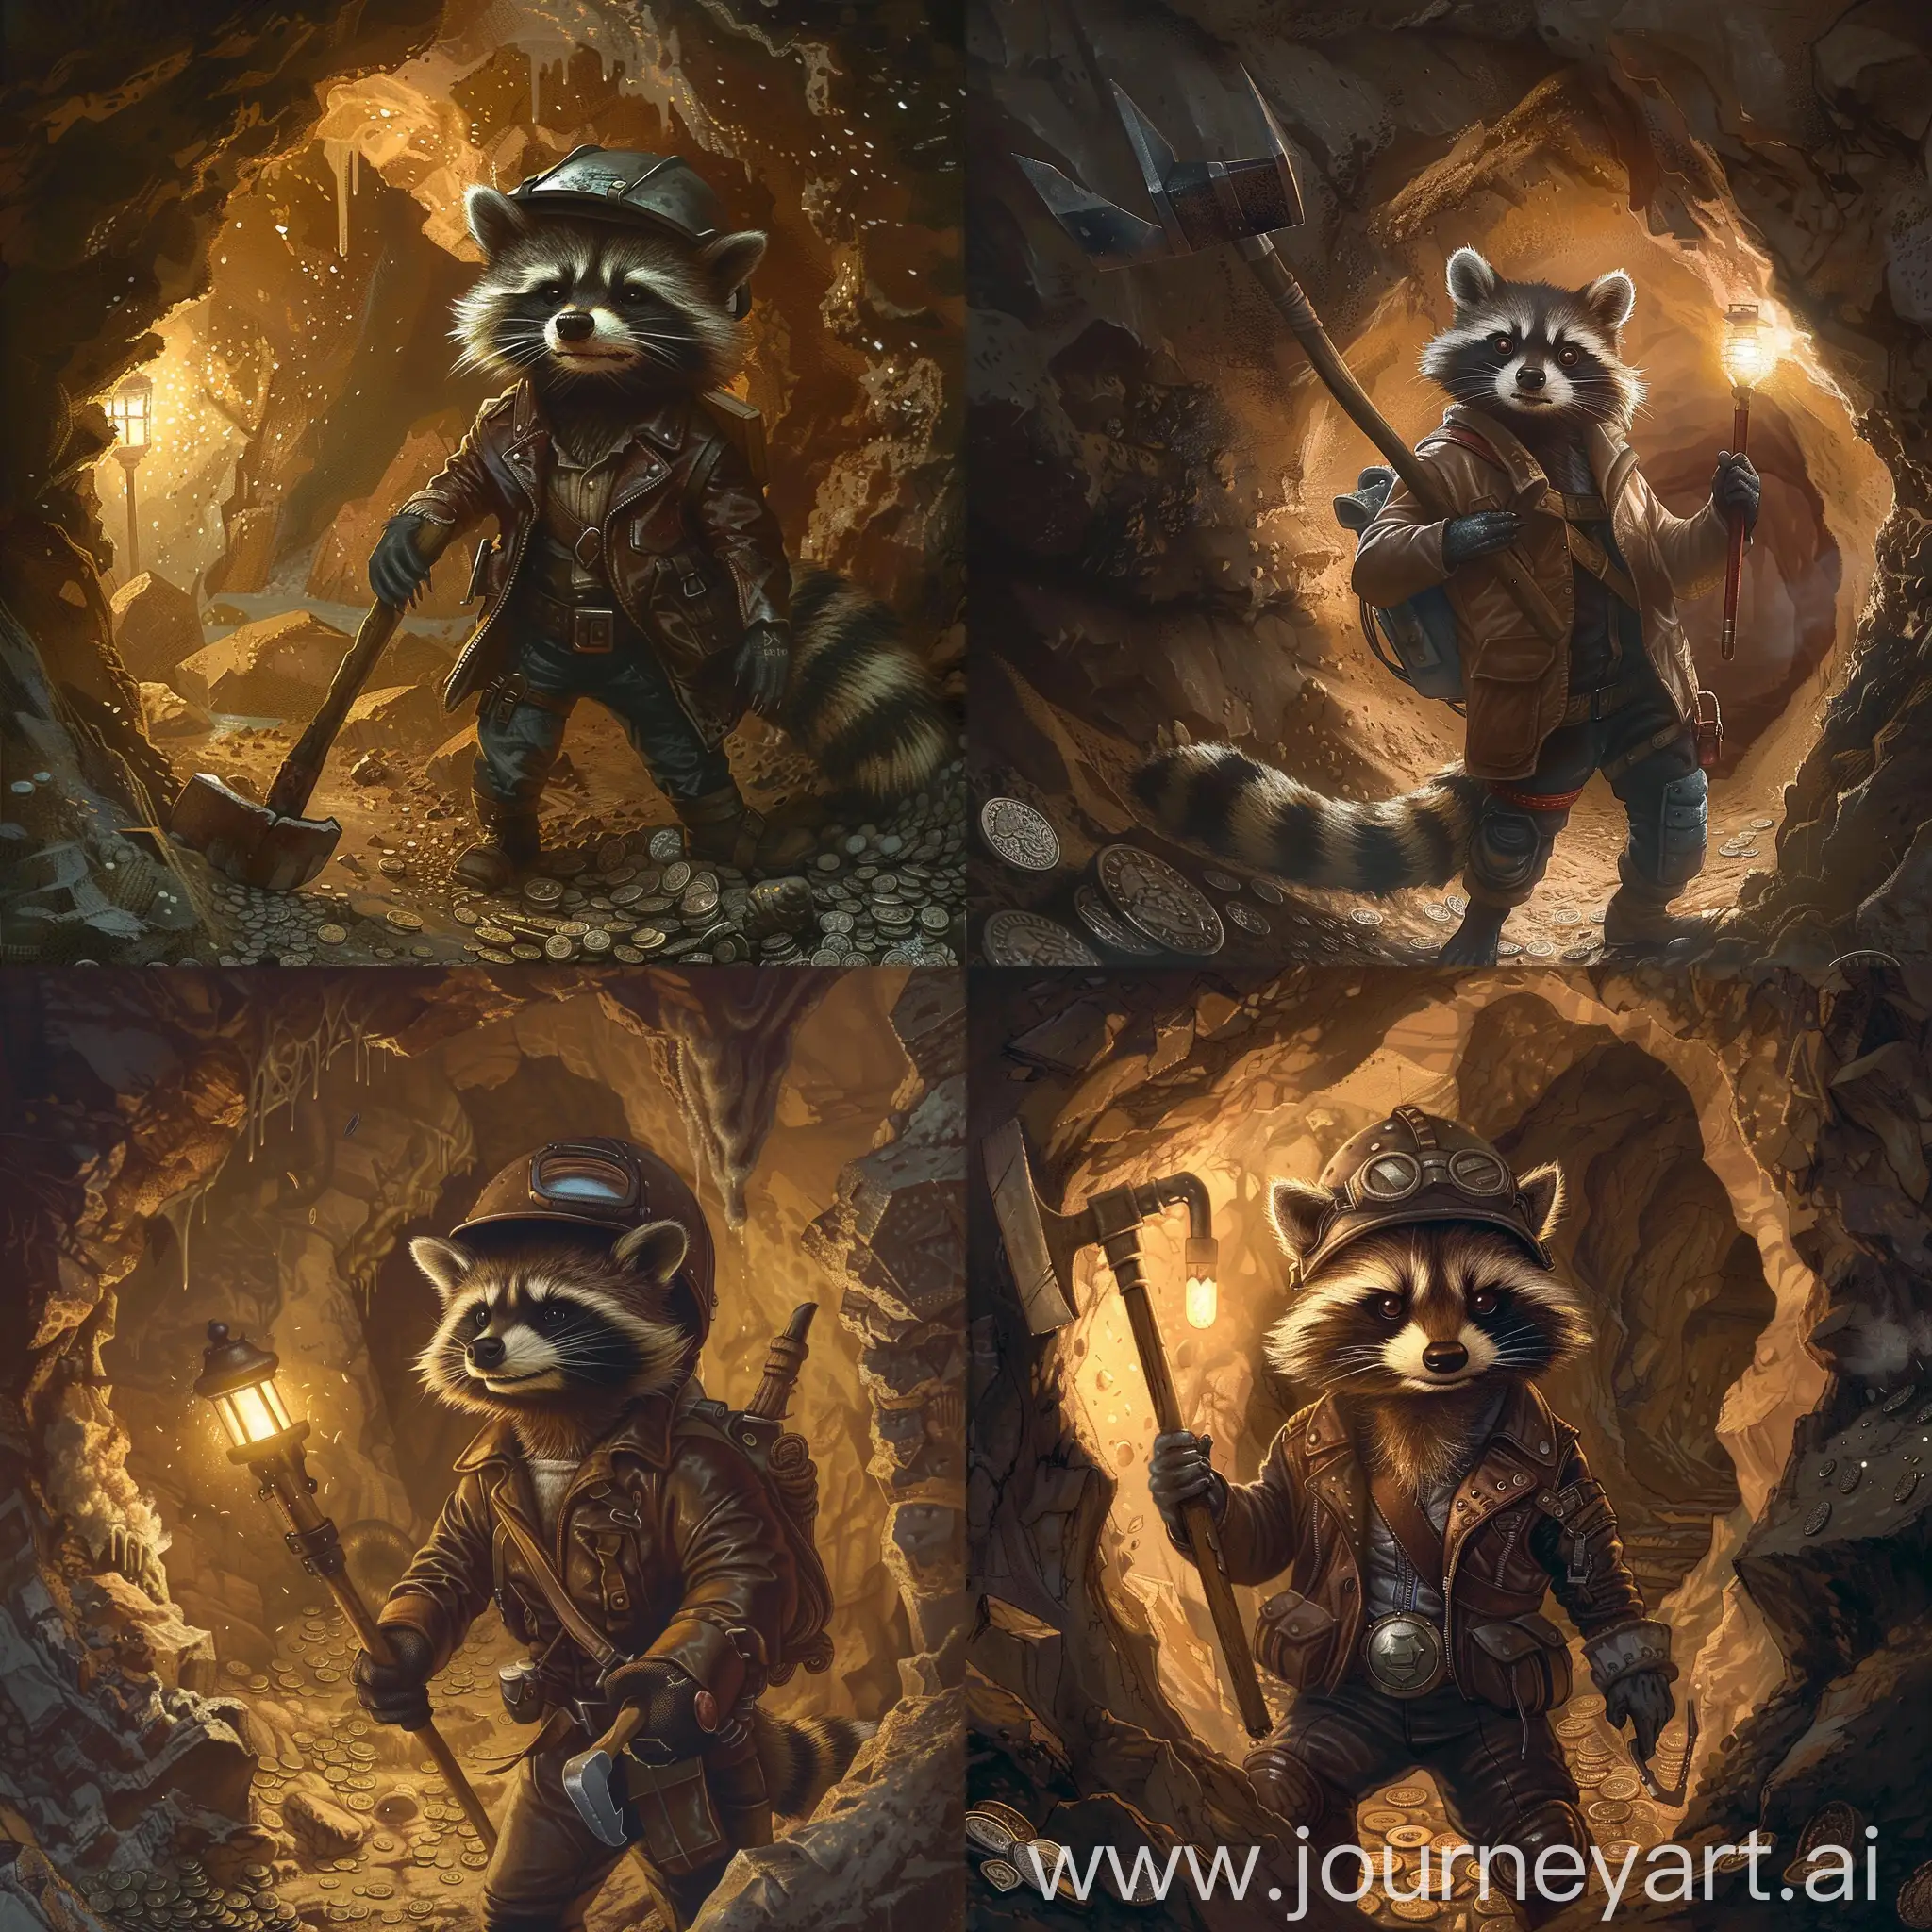 Raccoon-Miner-in-Leather-Jacket-Extracting-Coins-in-Cave